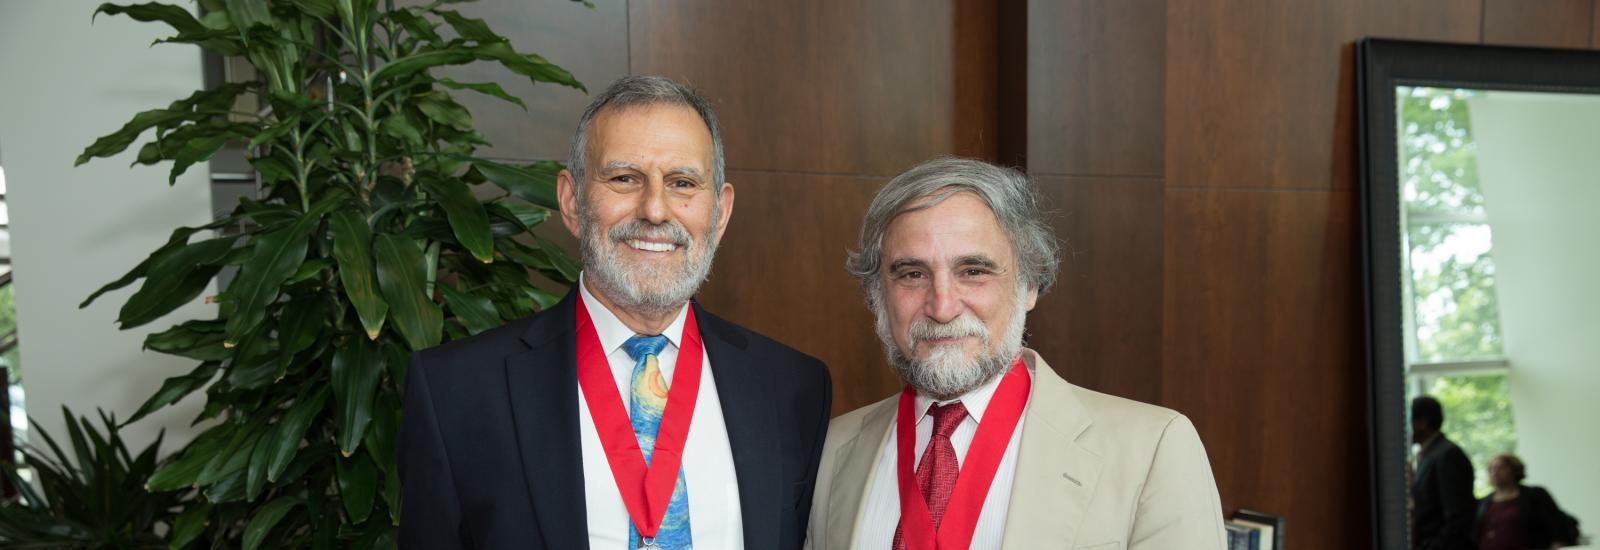 Distinguished University Professors Peter Culicover and Brian Joseph